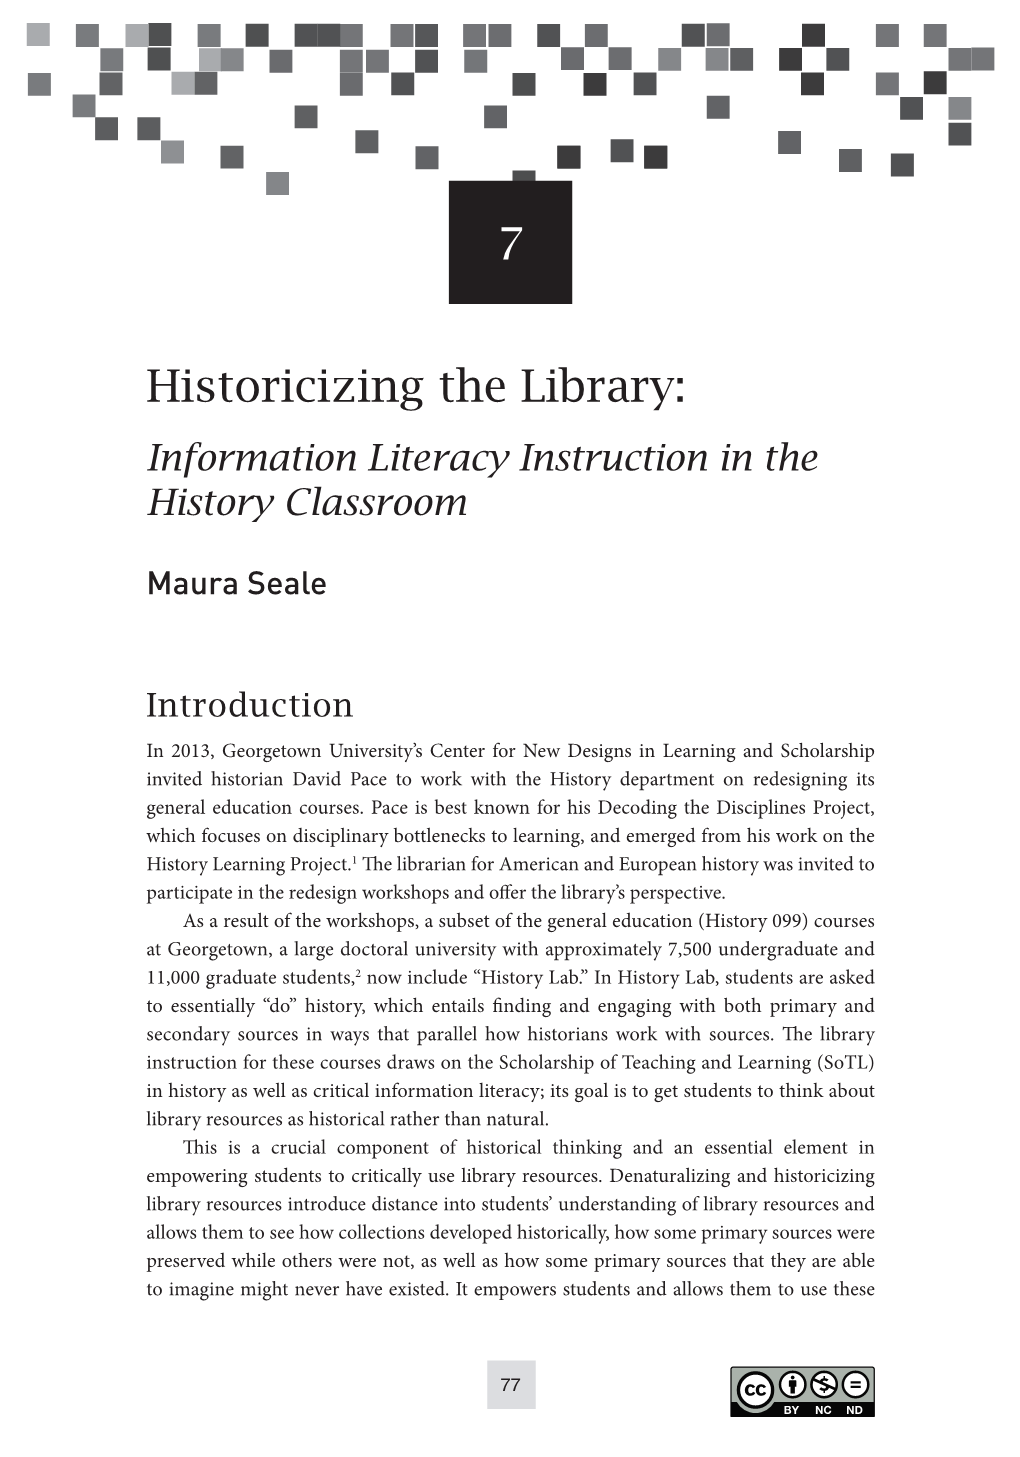 Historicizing the Library: Information Literacy Instruction in the History Classroom